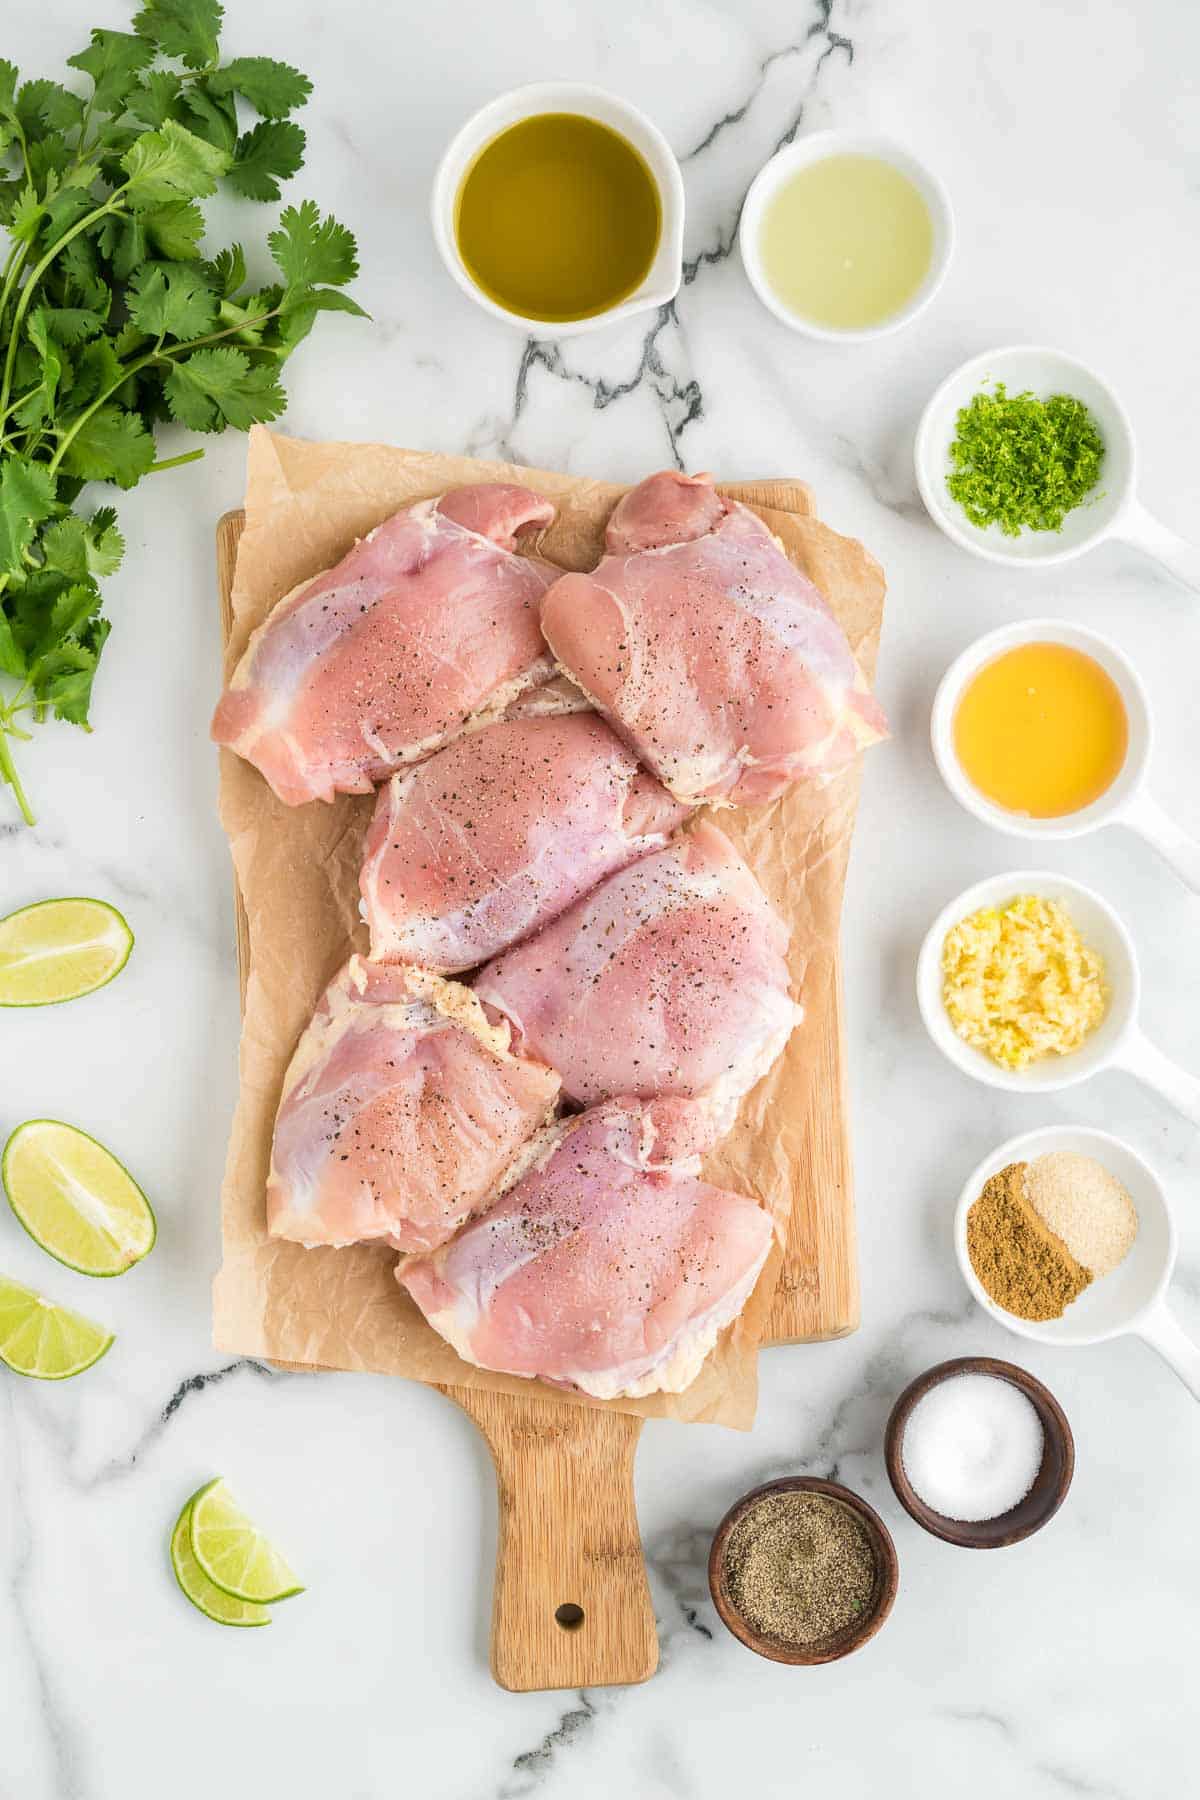 Ingredients needed for cilantro lime chicken - chicken, lime, cilantro, olive oil.